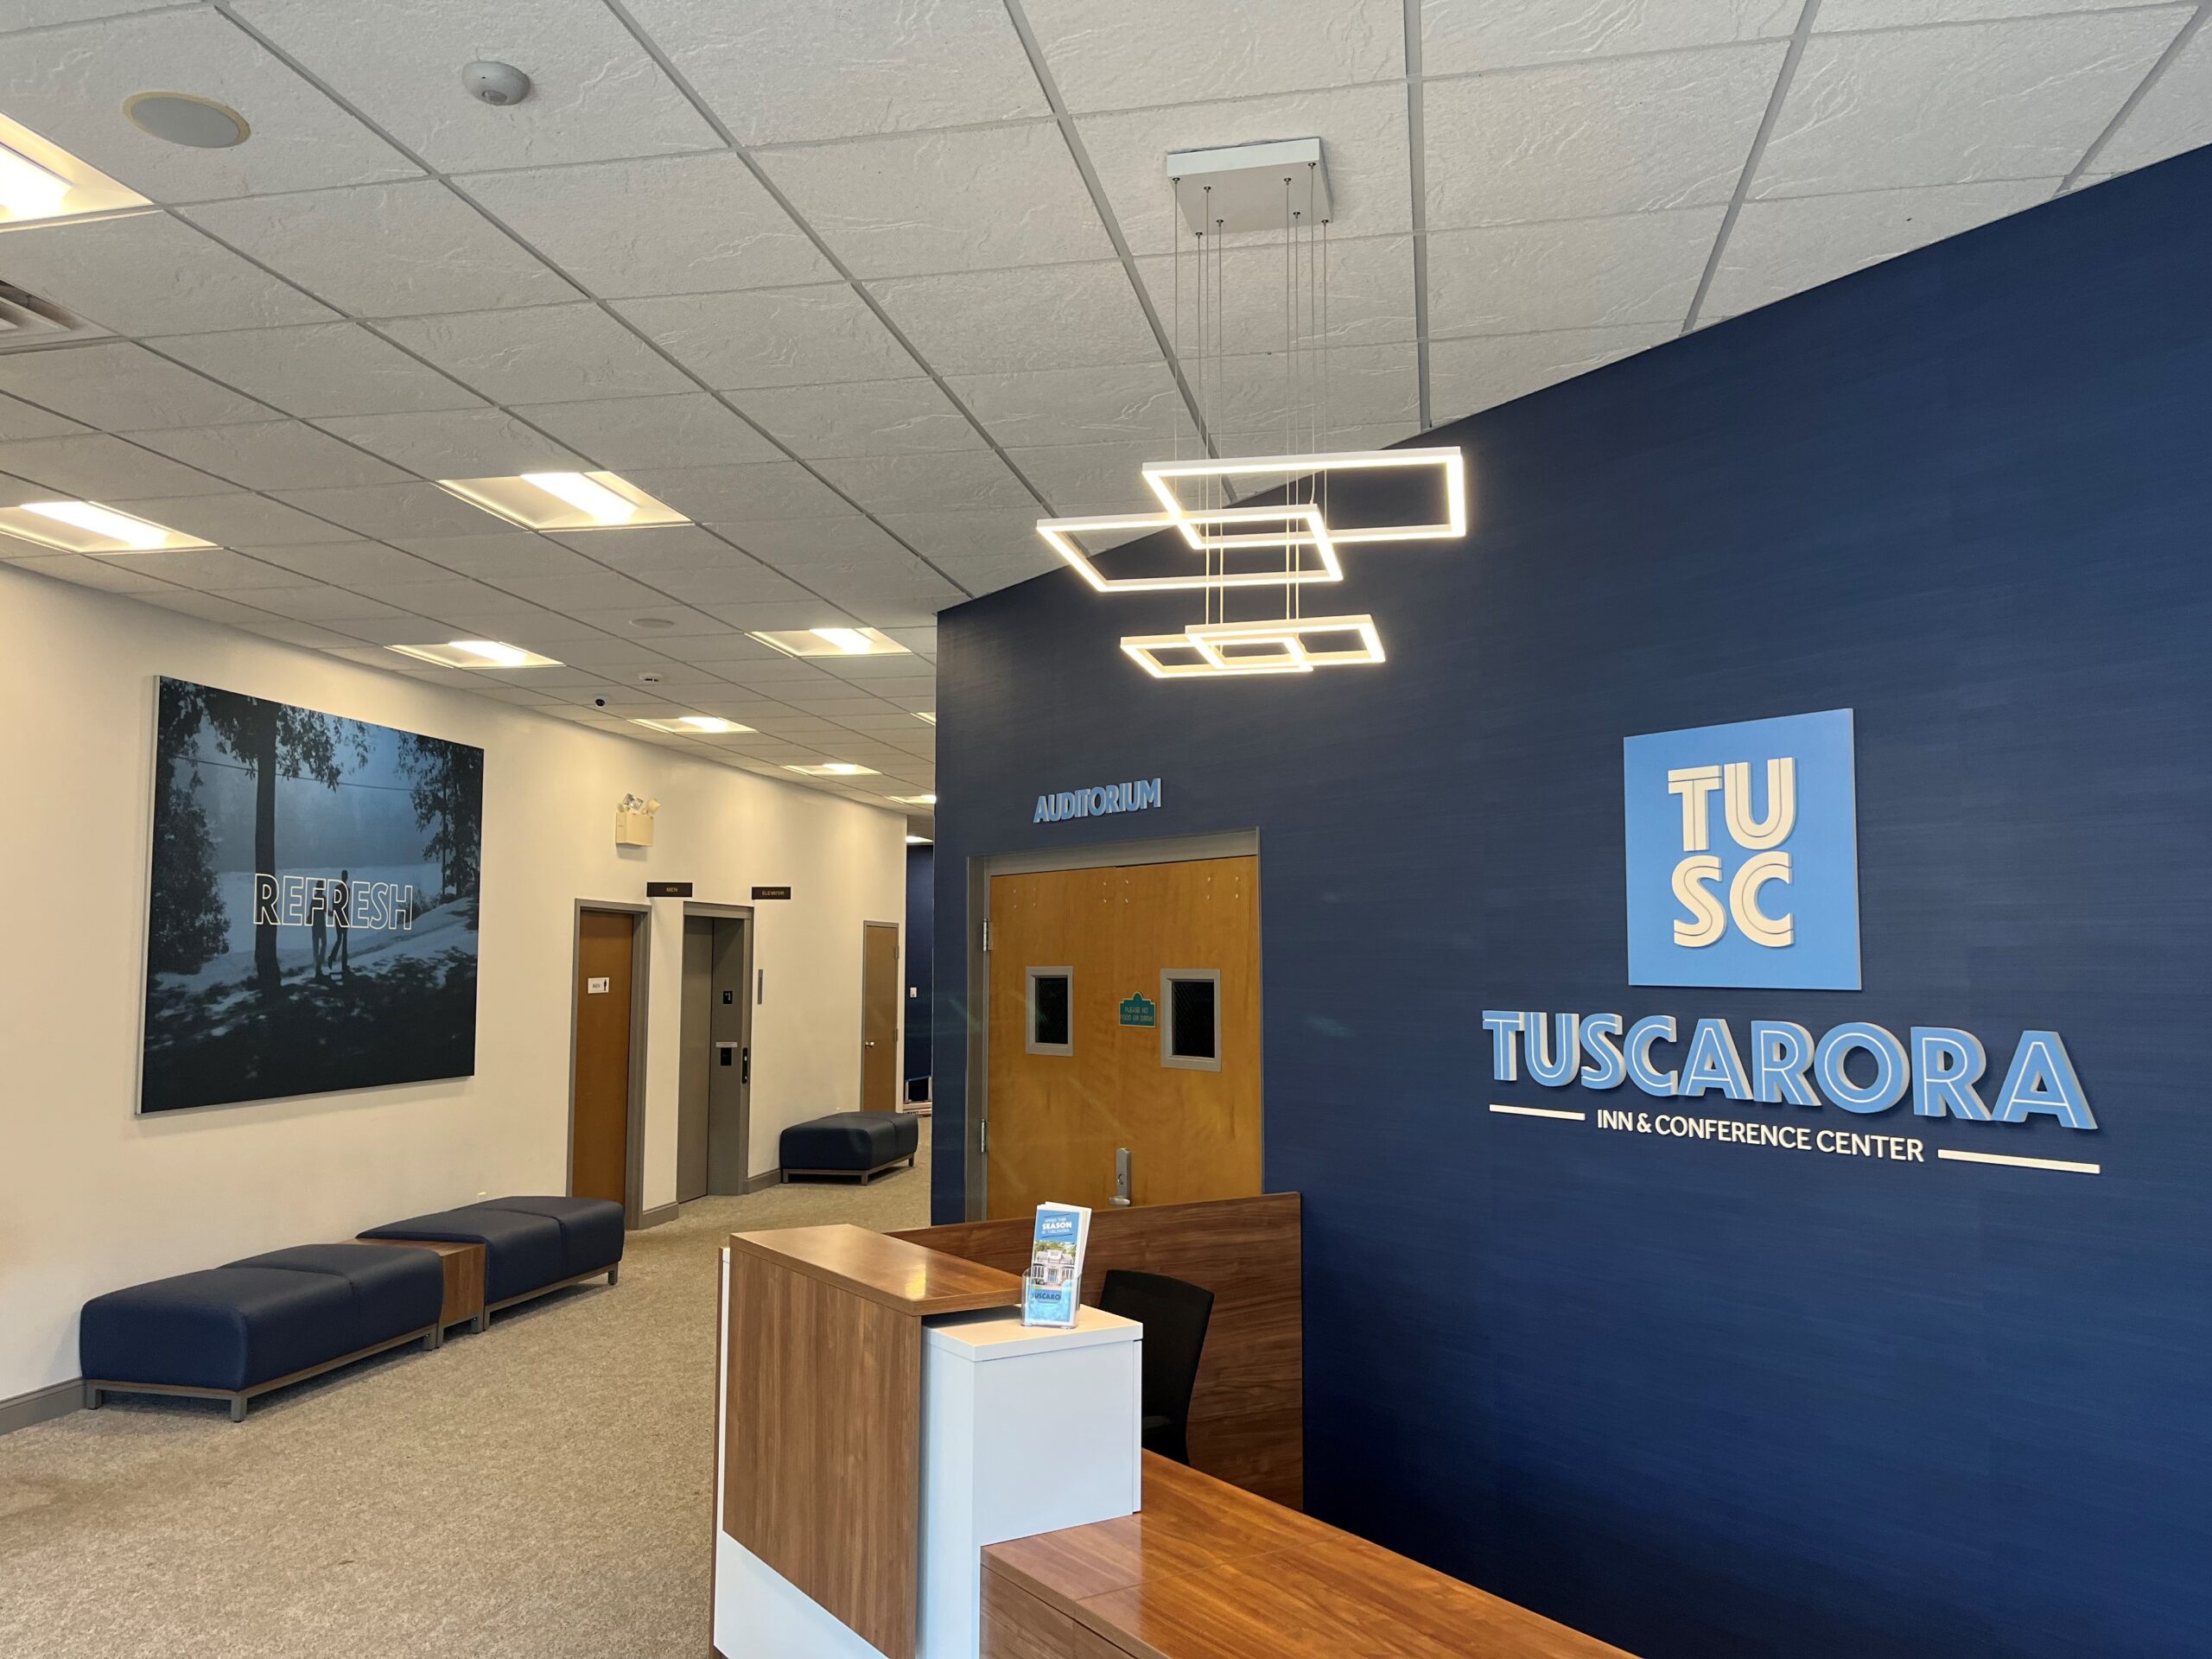 Right View of Reception Desk for a Makeover of the Tuscarora Inn & Conference Center